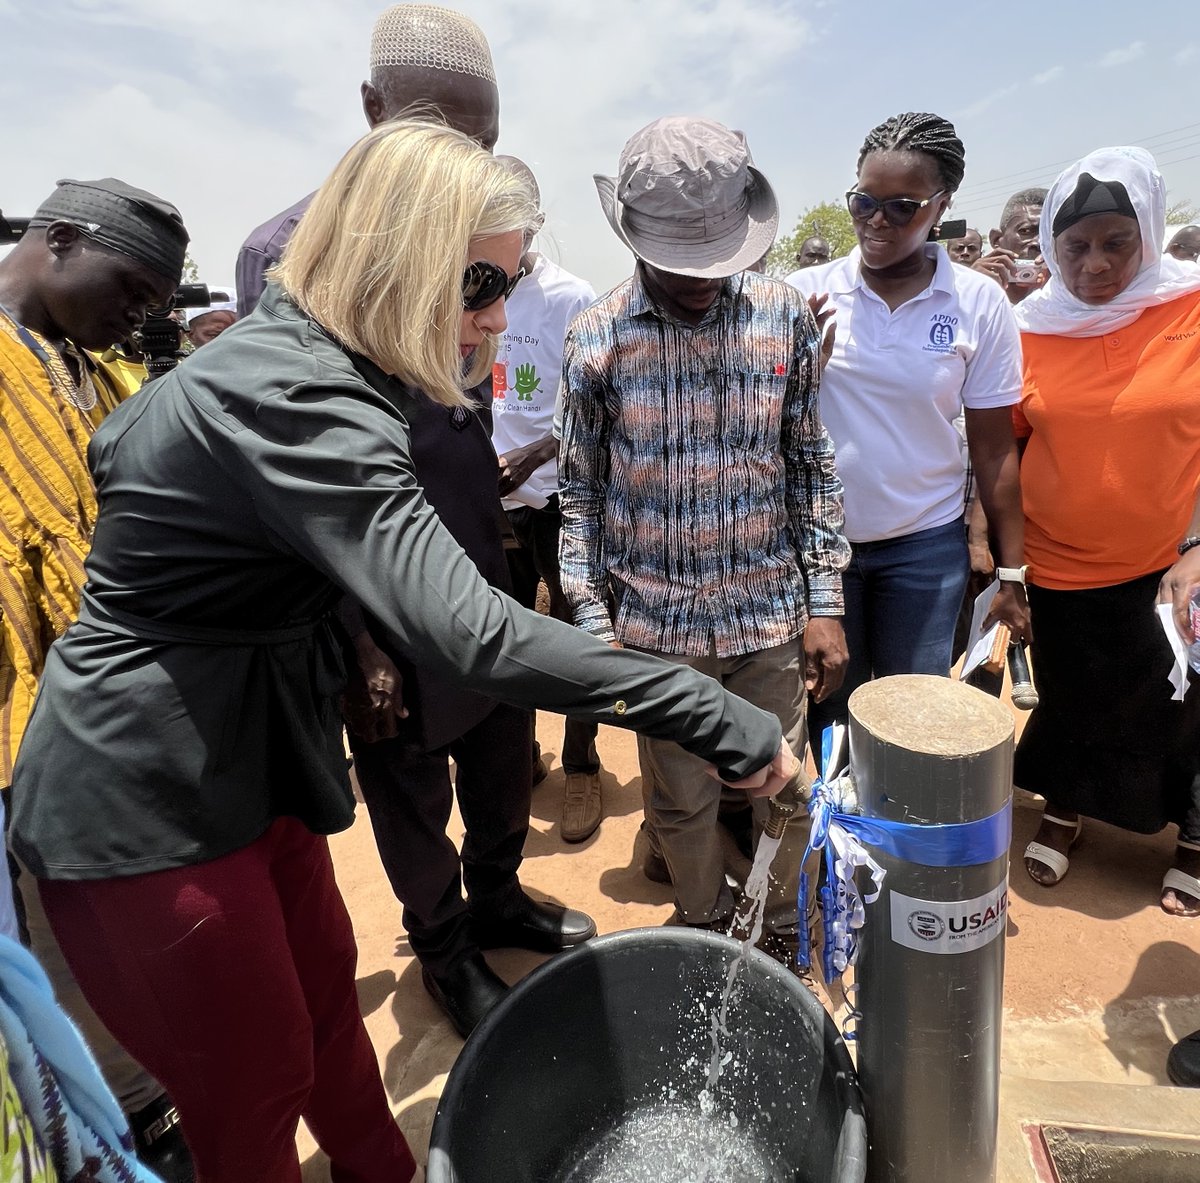 Last week, #USAIDinGhana inaugurated two water projects in the Northern Region that will bring clean water to 20,000 Ghanaians. gh.usembassy.gov/u-s-support-br…